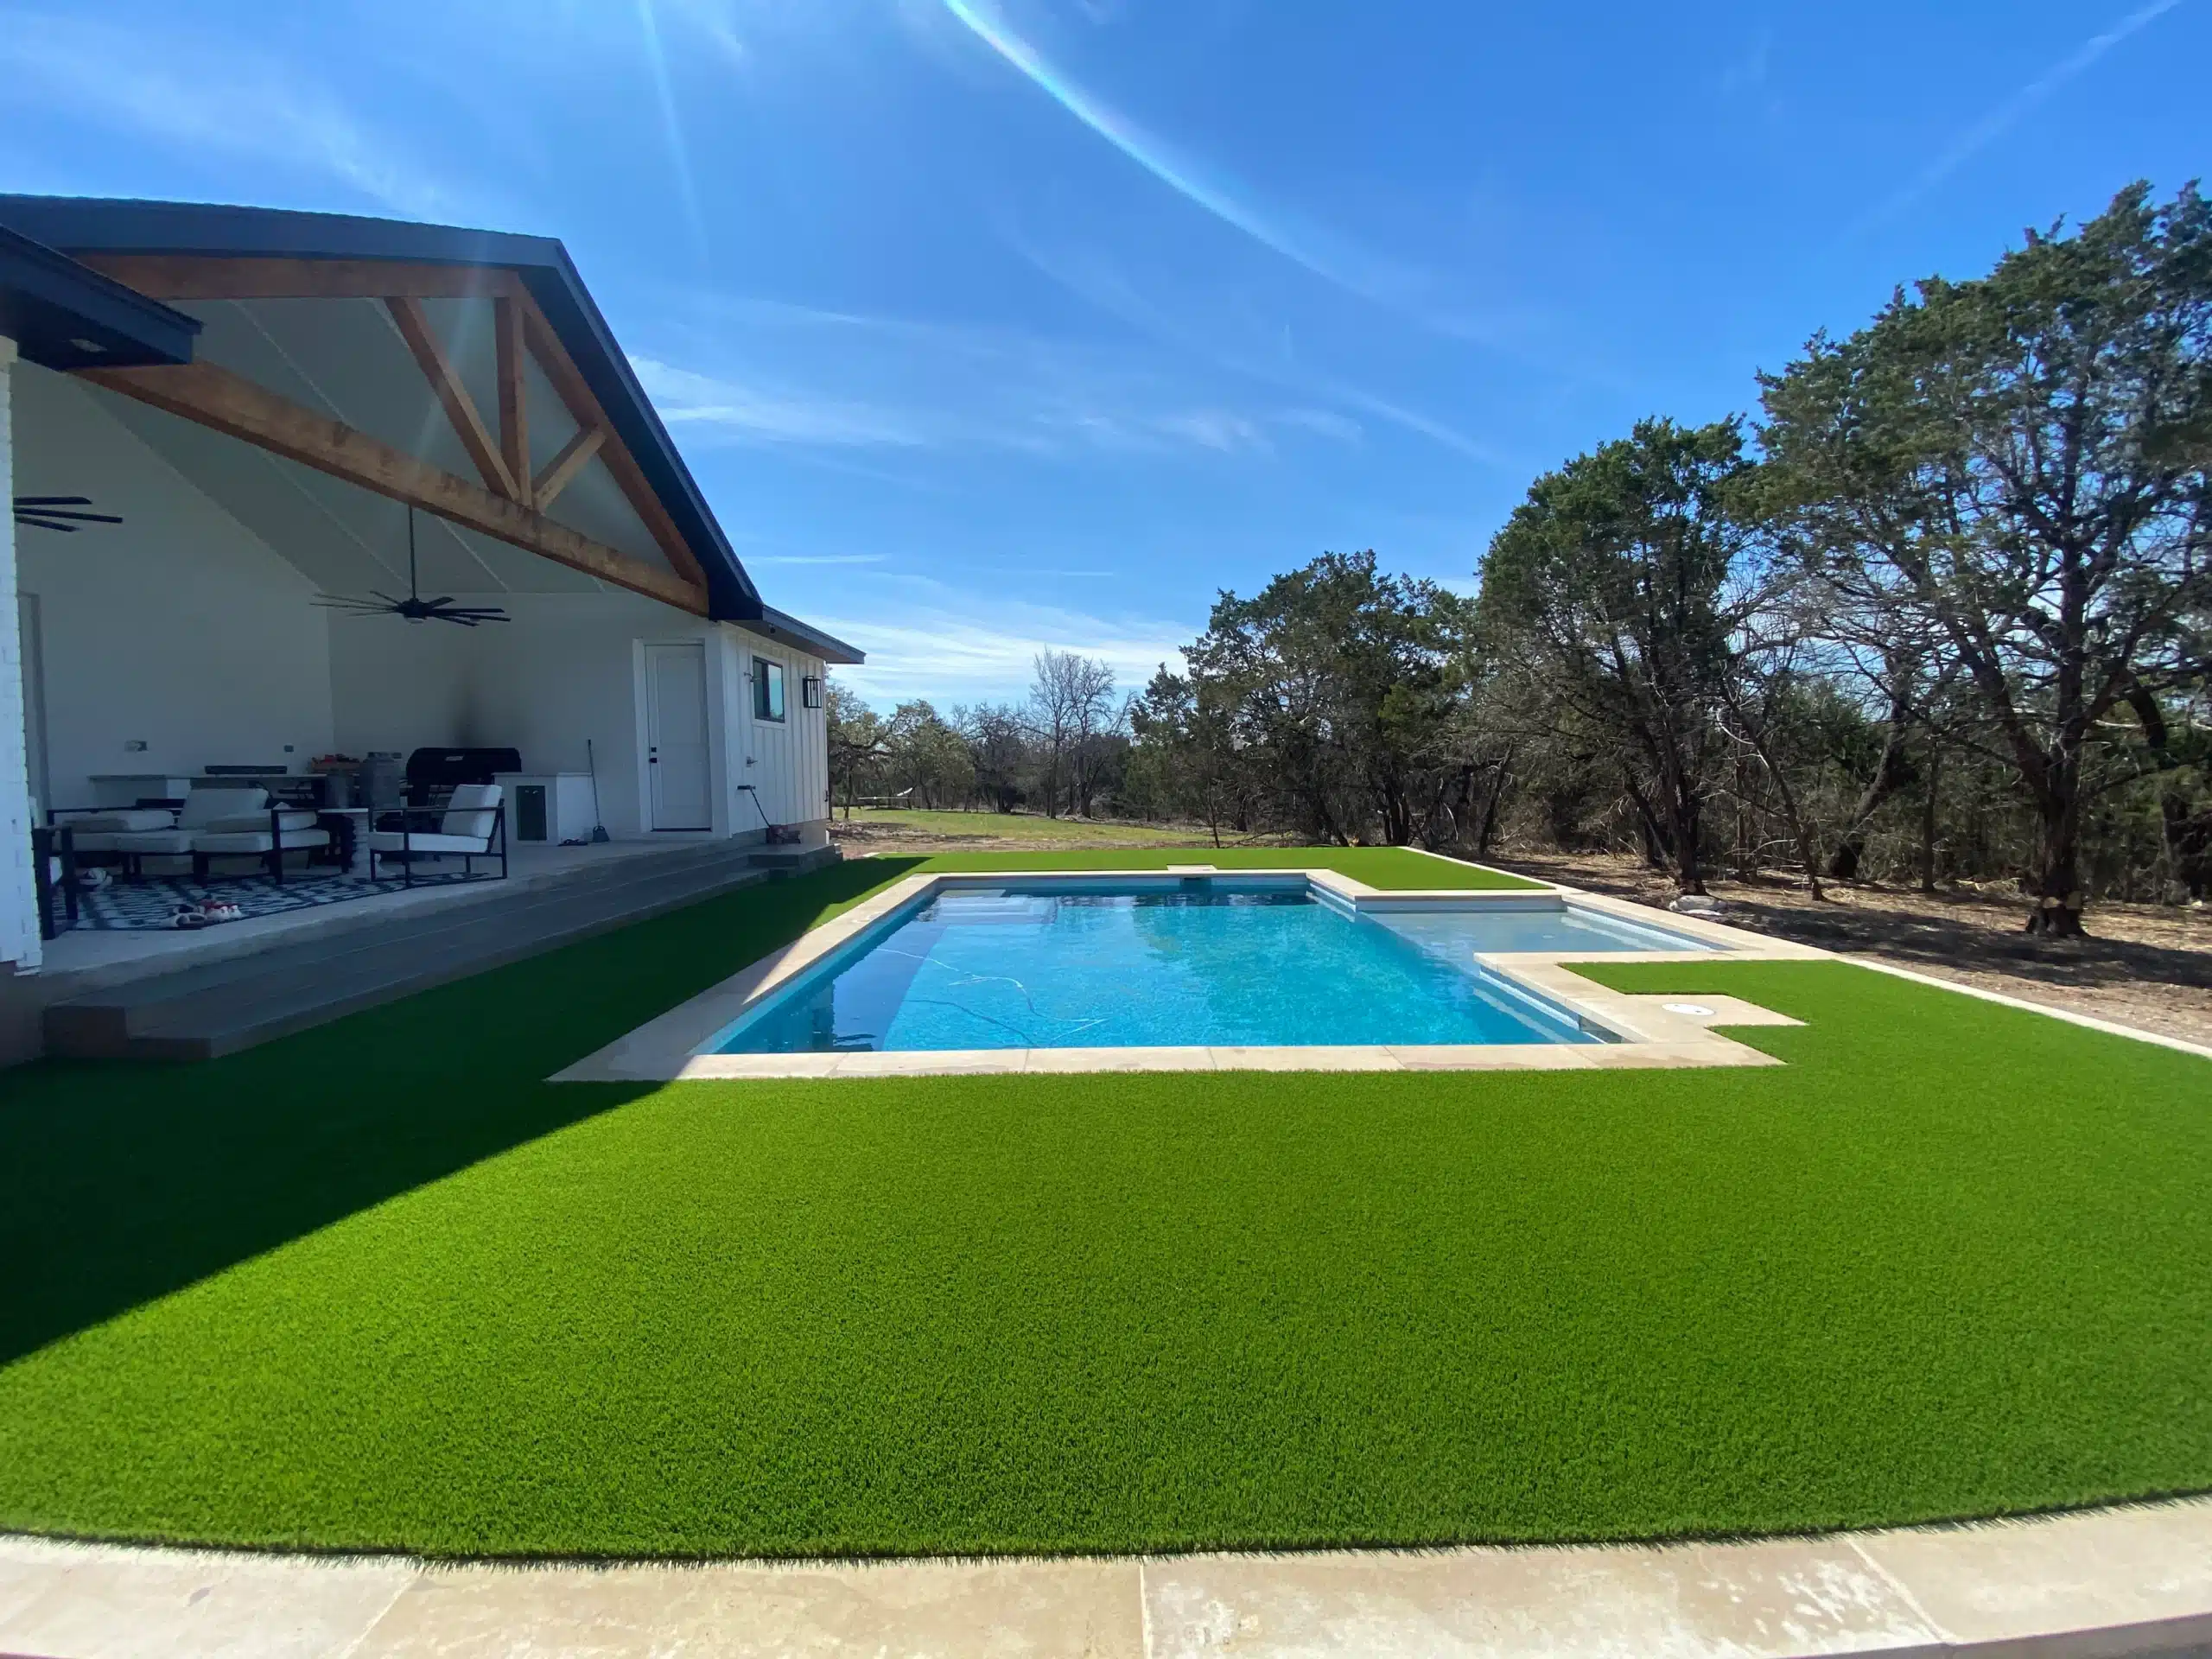 backyard surrounded by trees with raised area for in-ground pool surrounded by turf